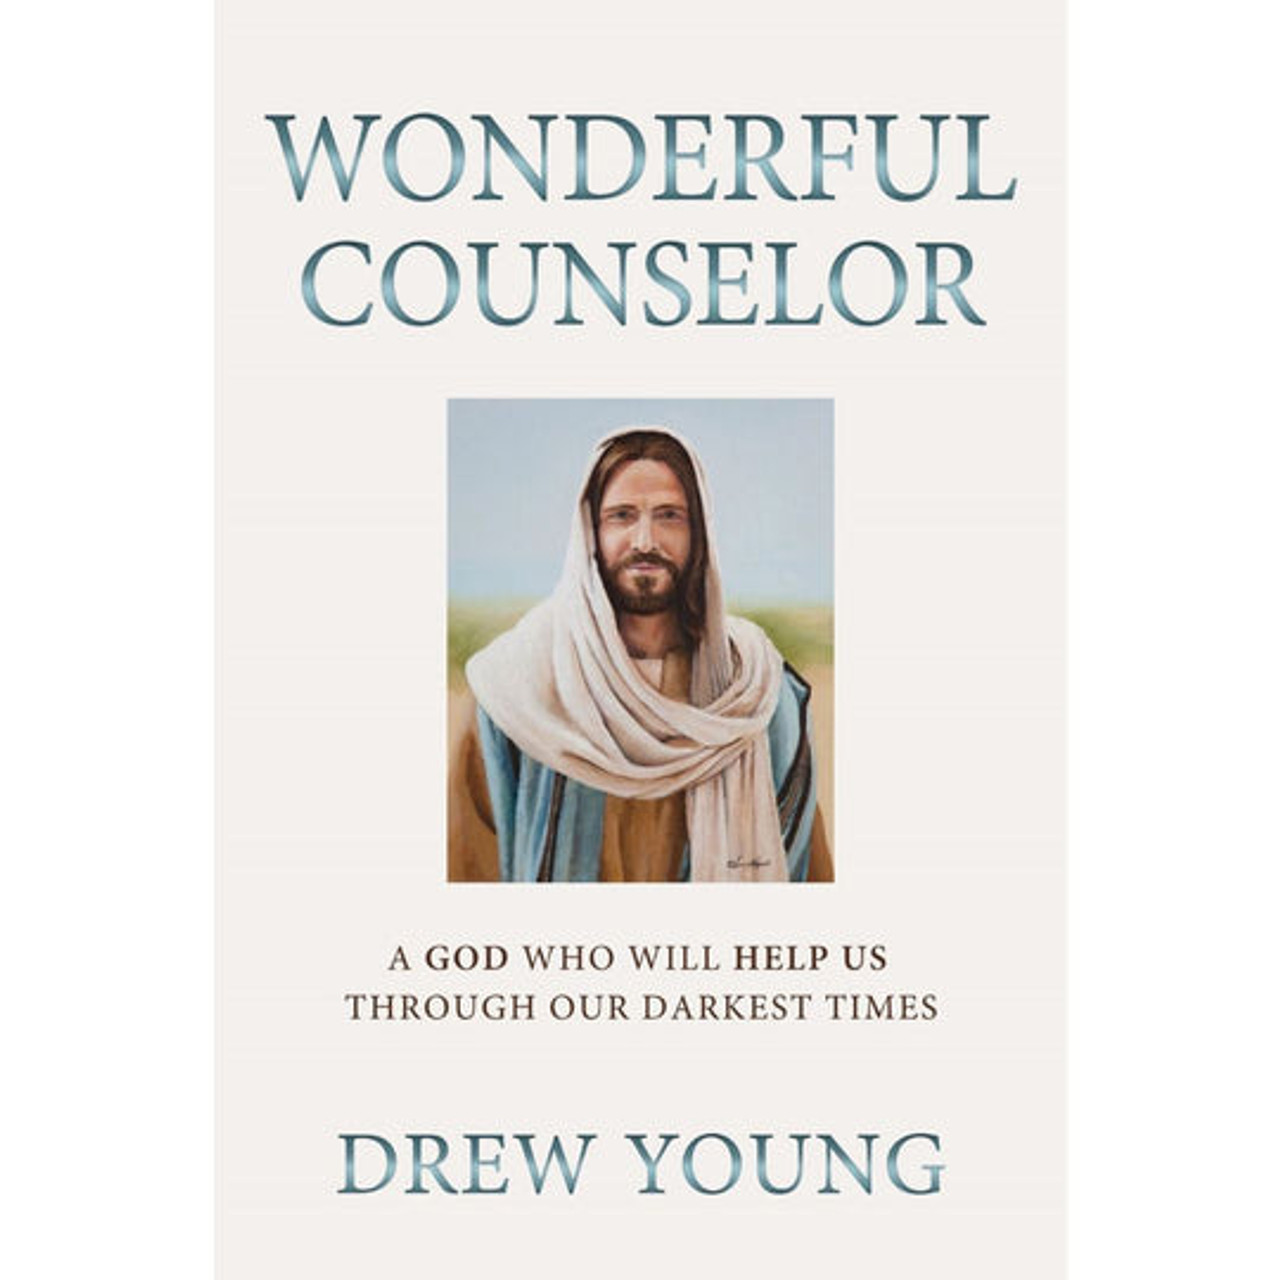 Wonderful Counselor: A God Who Will Help Us Through Our Darkest Times (Paperback)*